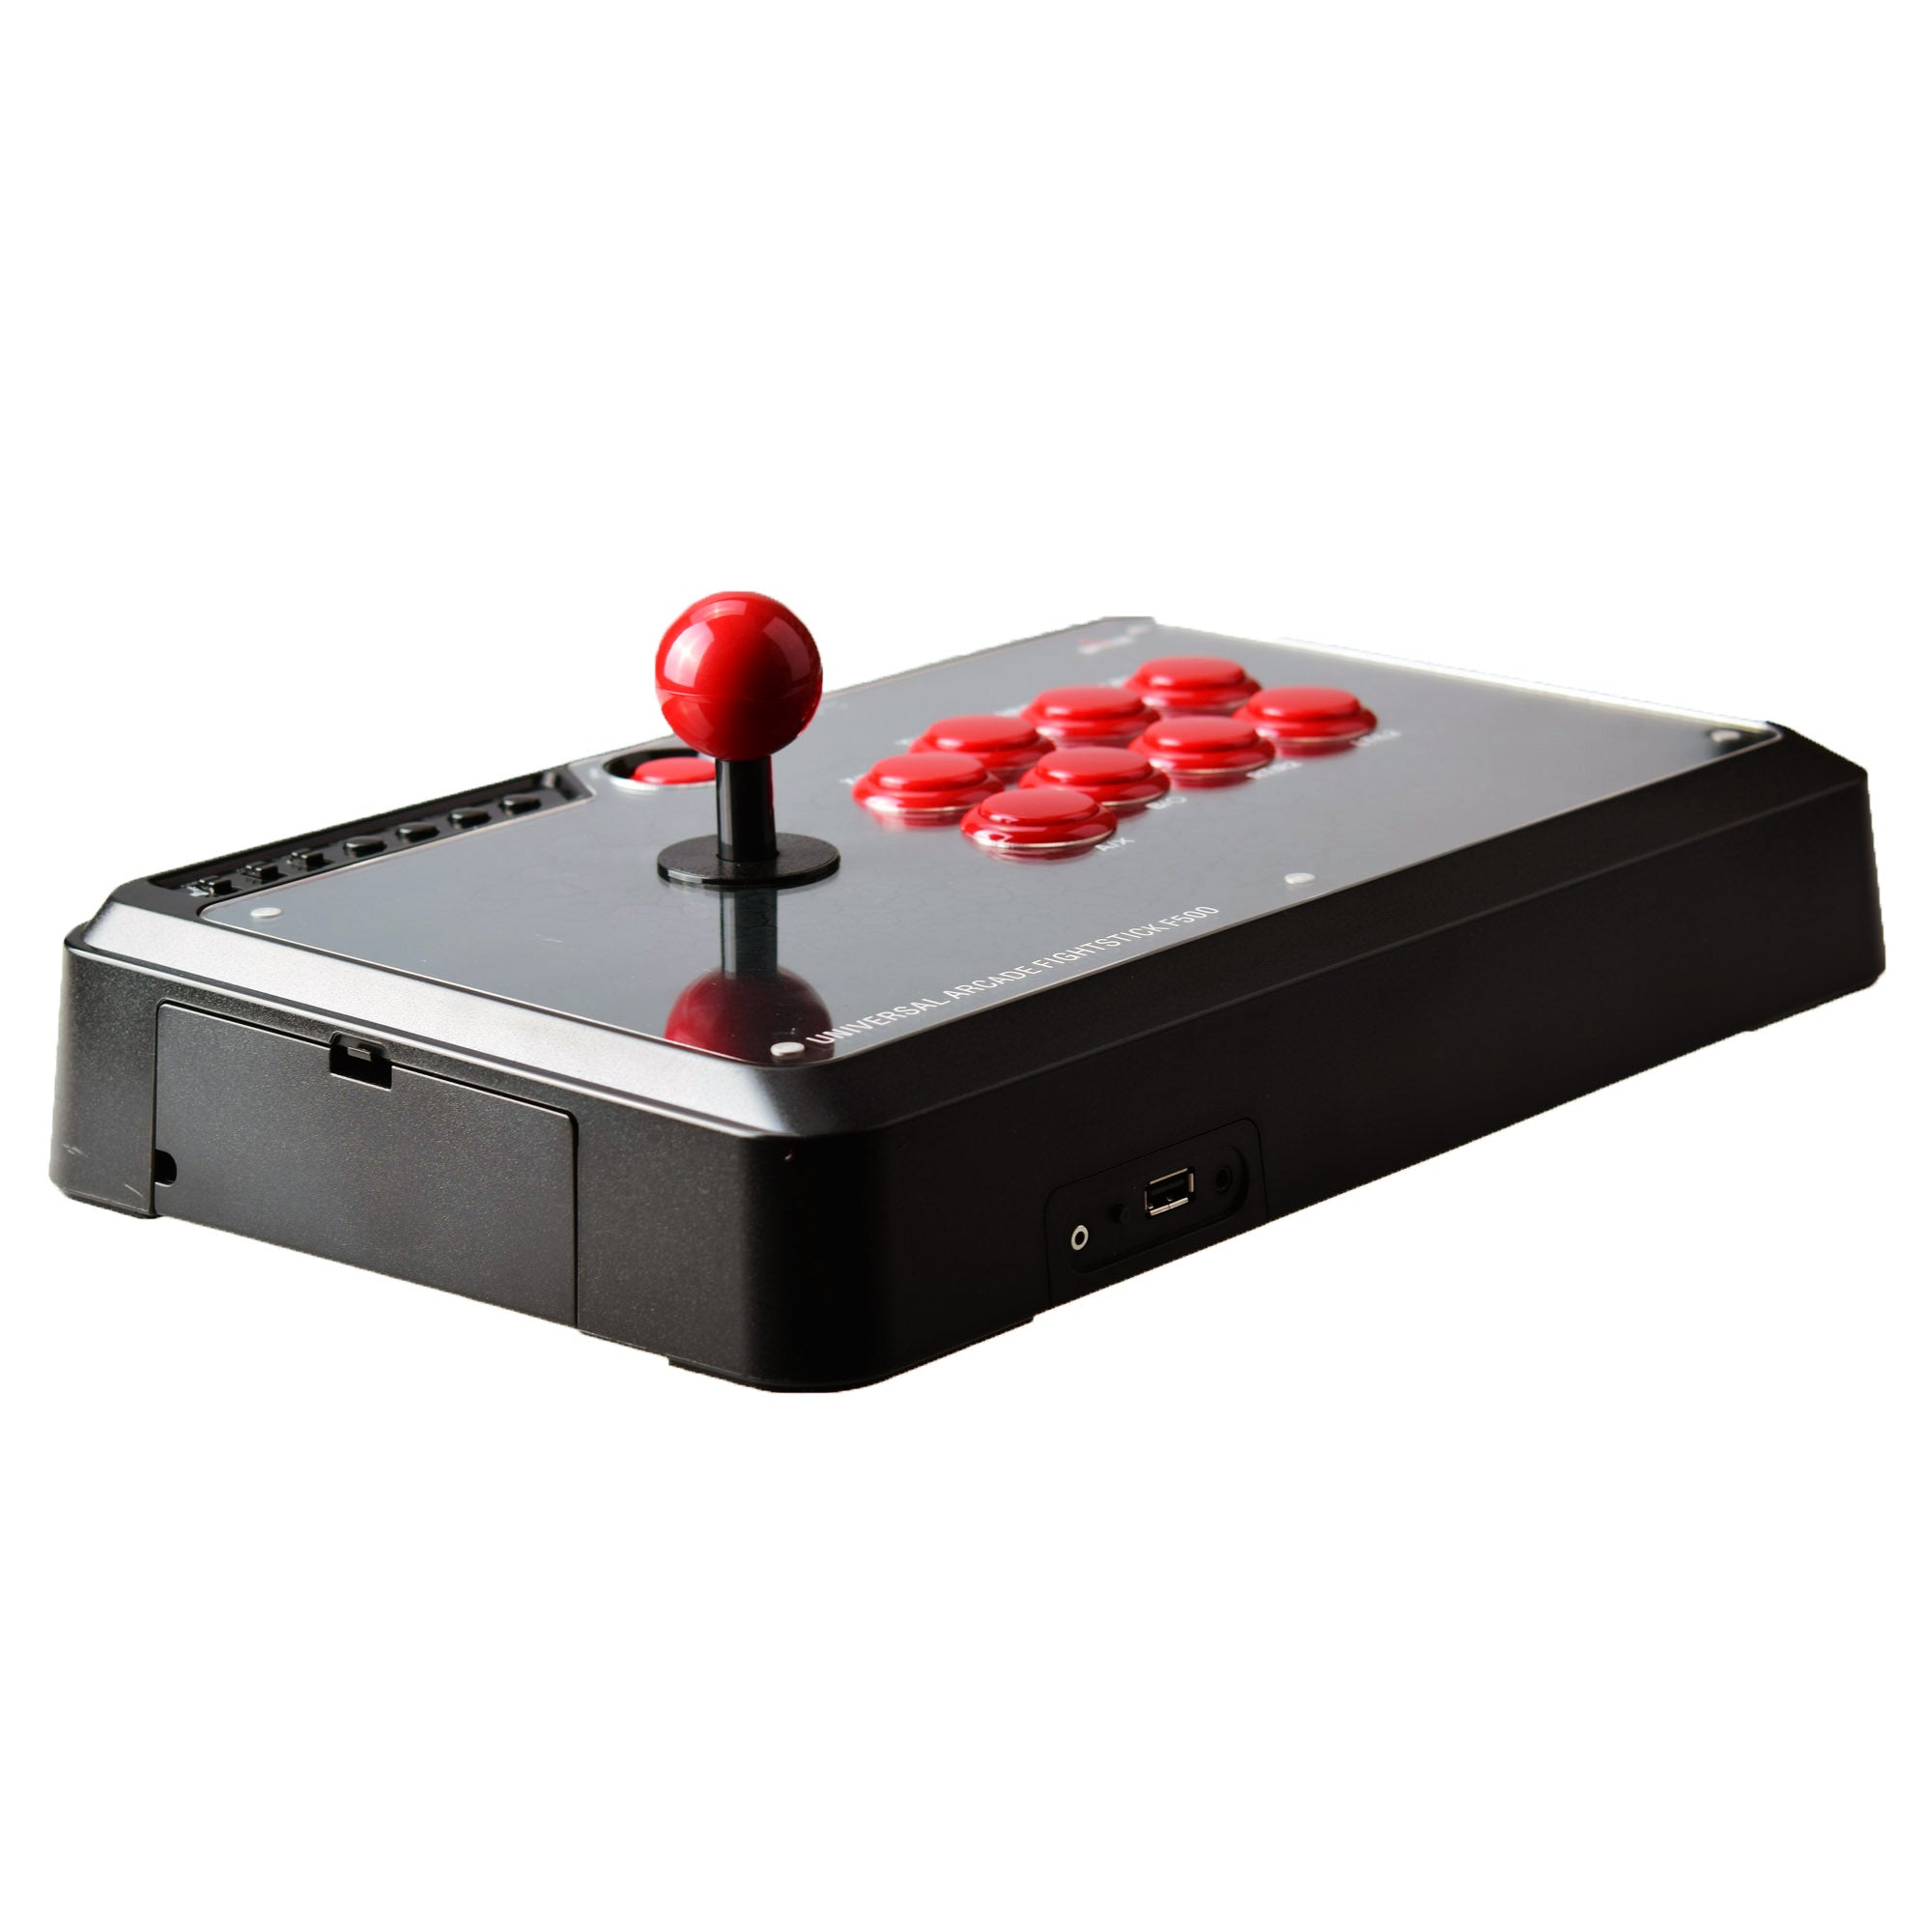 MayFlash Arcade Fightstick F500 for PS4 PS3 Xbox One 360 PC Android (F